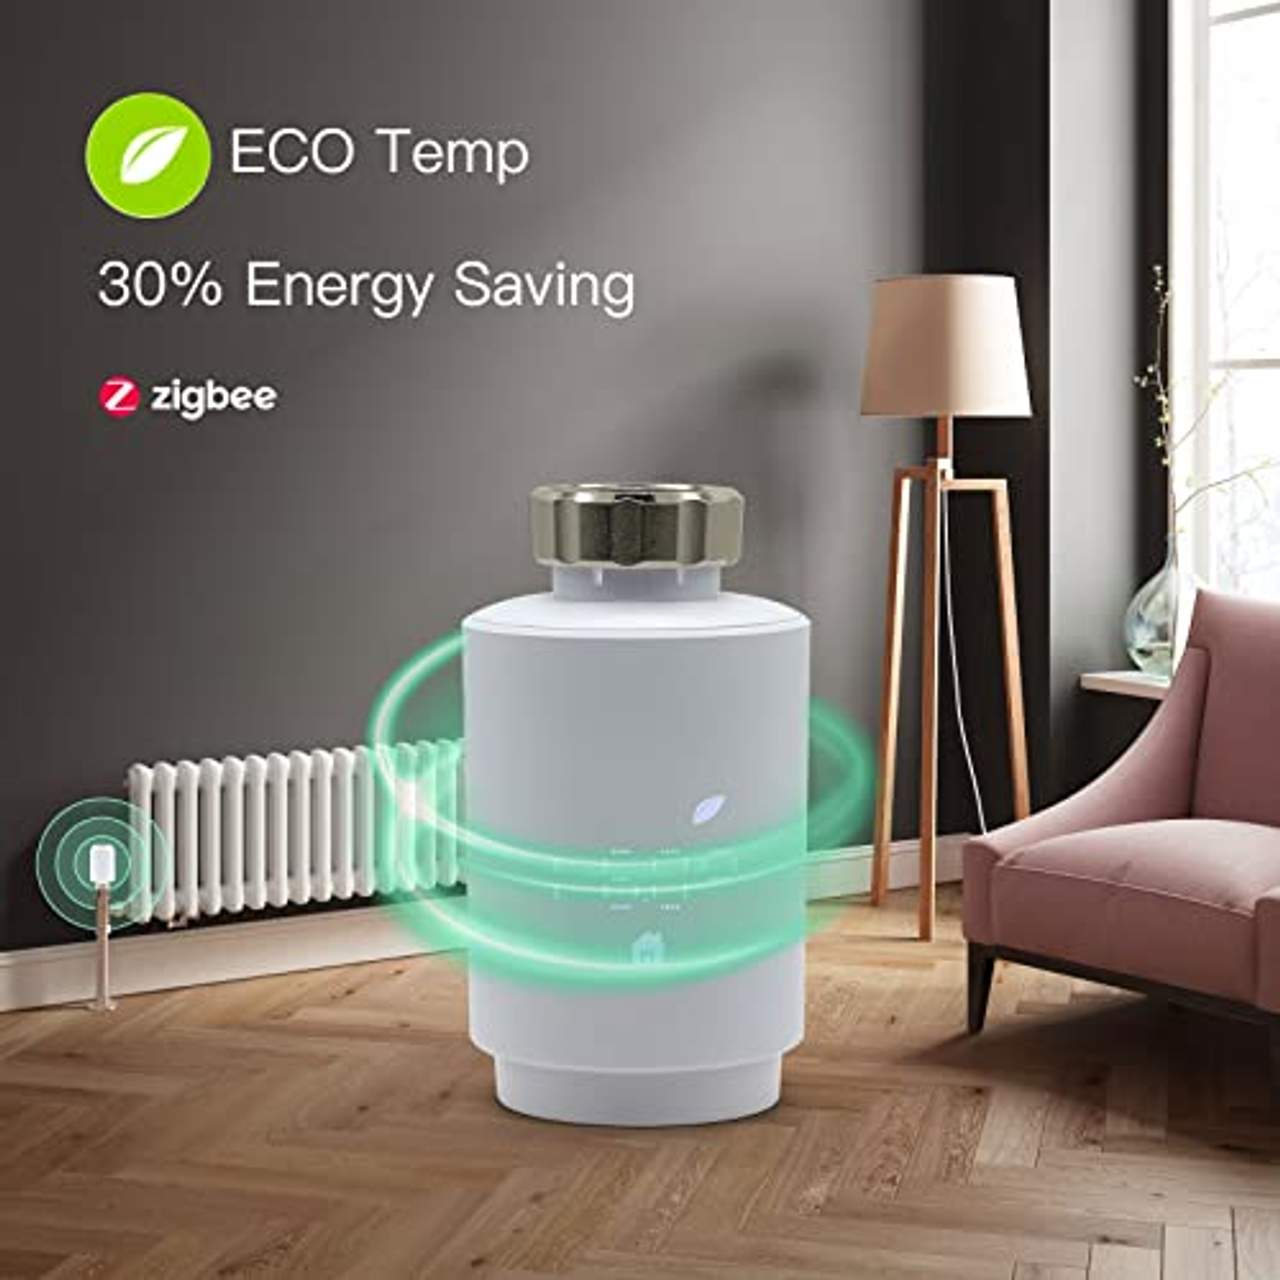 BSEED Smart Home 4er Wifi Thermostat Heizung